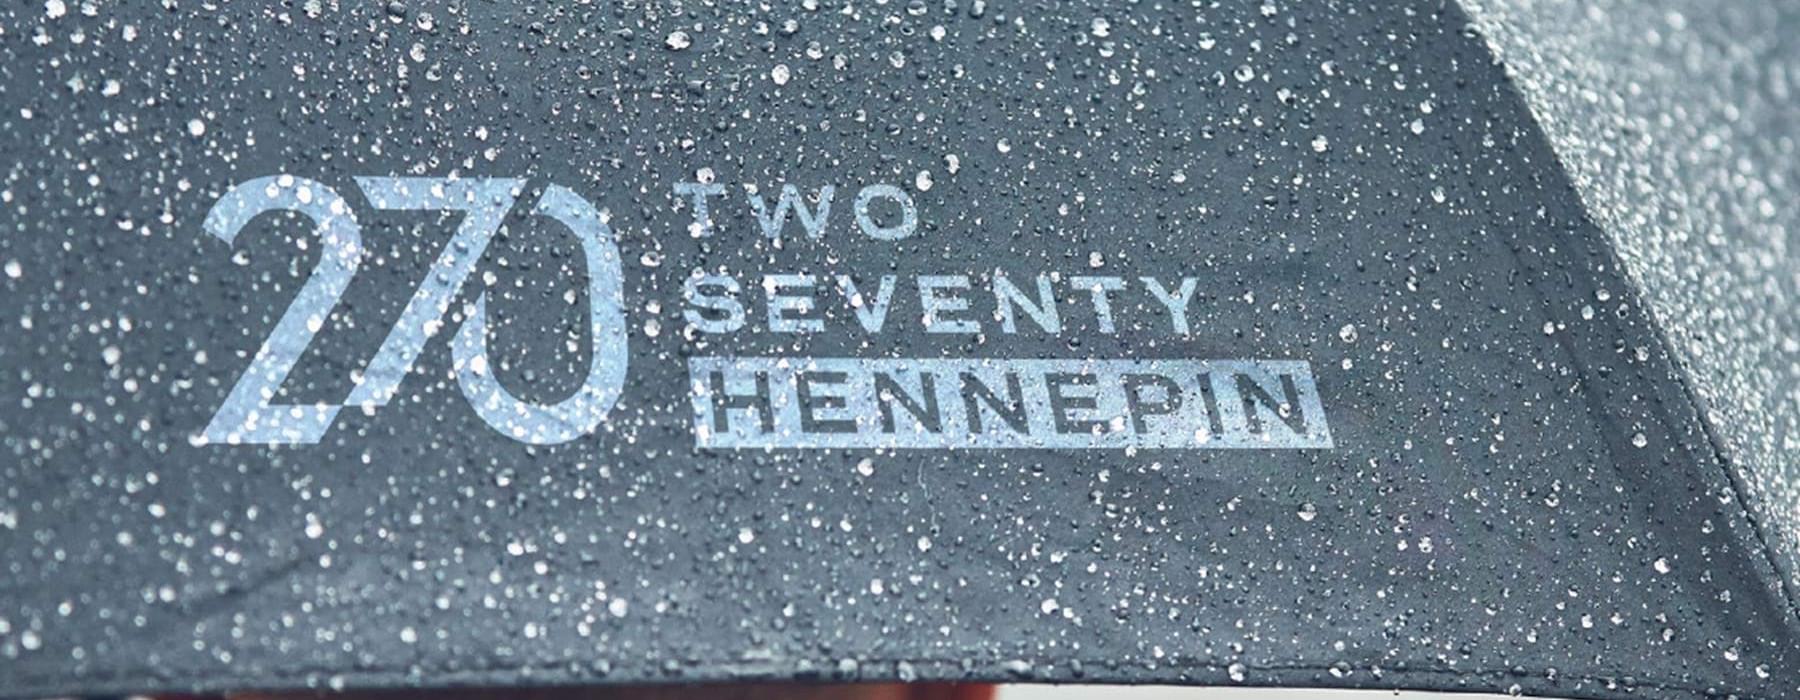 image of property logo stamped into concrete